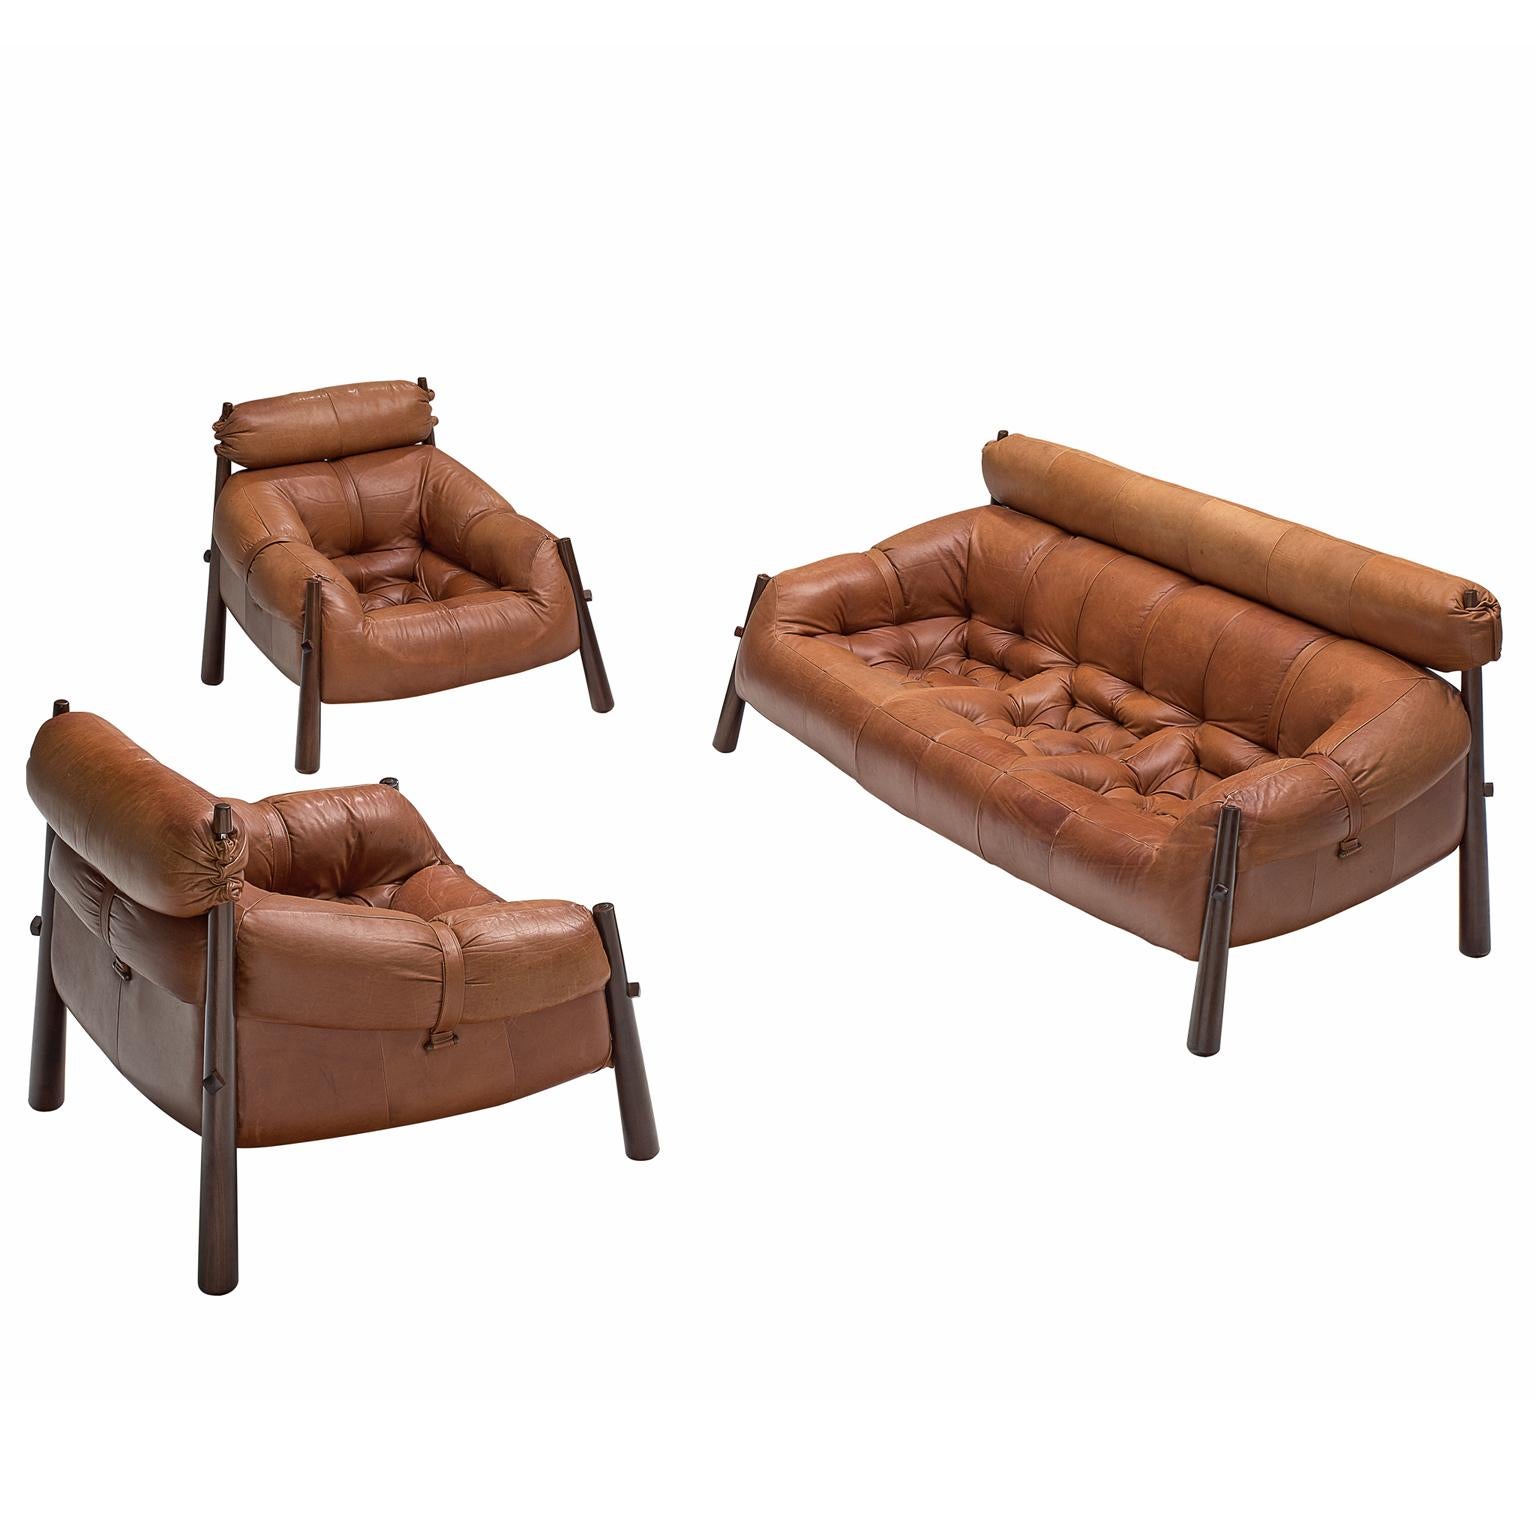 Percival Lafer 'Mp-81' Lounge Set in Rosewood and Cognac